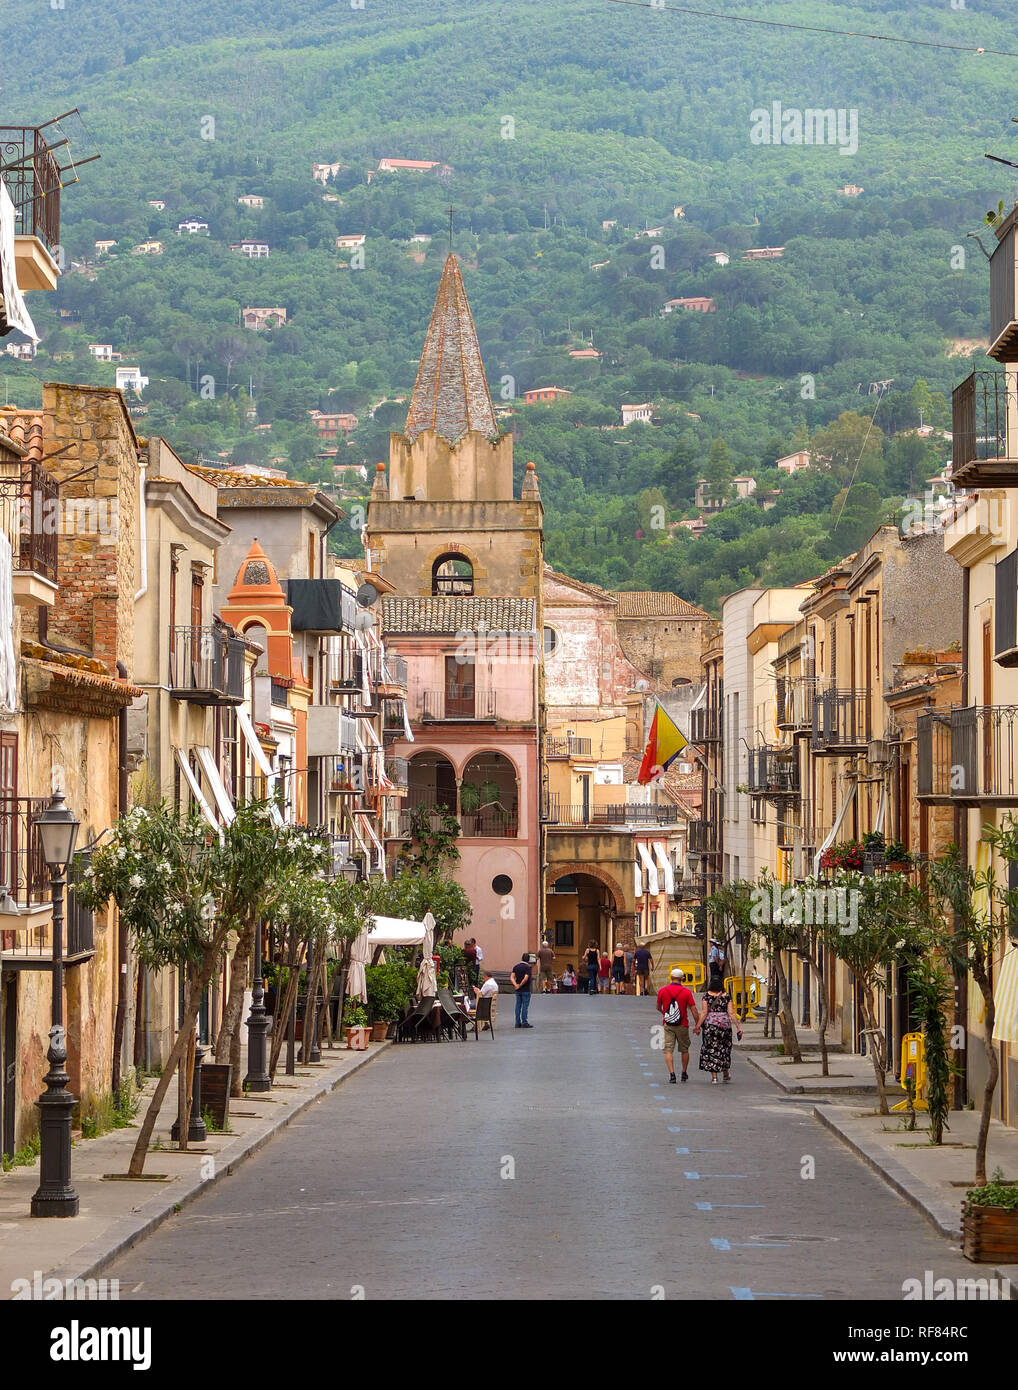 View of the small town of Castelbuono, Sicily, Italy Stock Photo